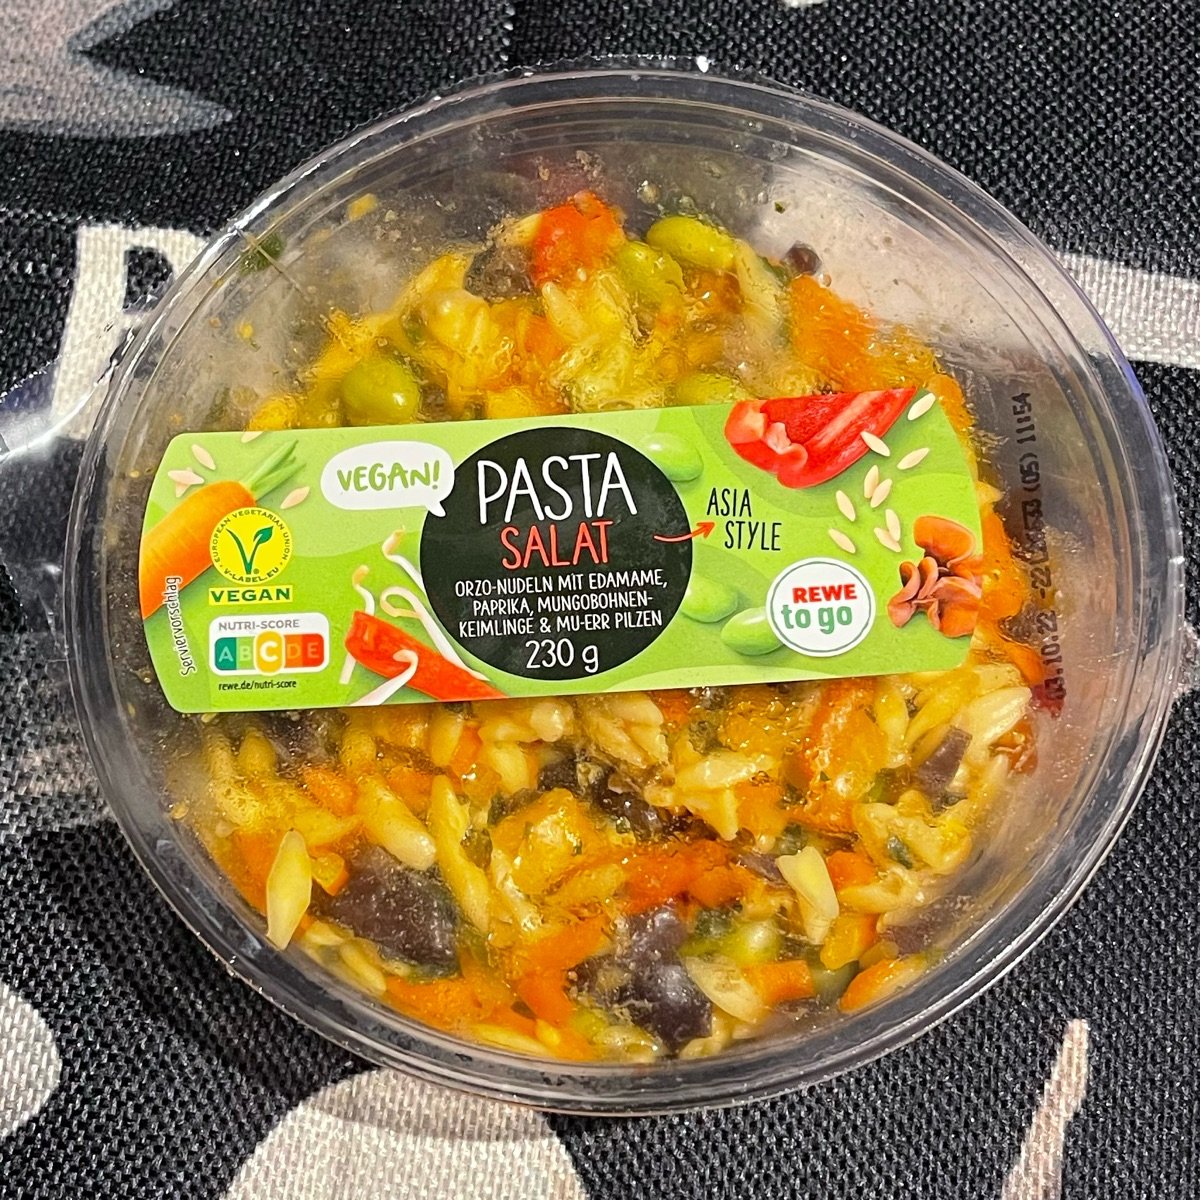 Rewe To Go Pastasalat Asia-Style Review | abillion